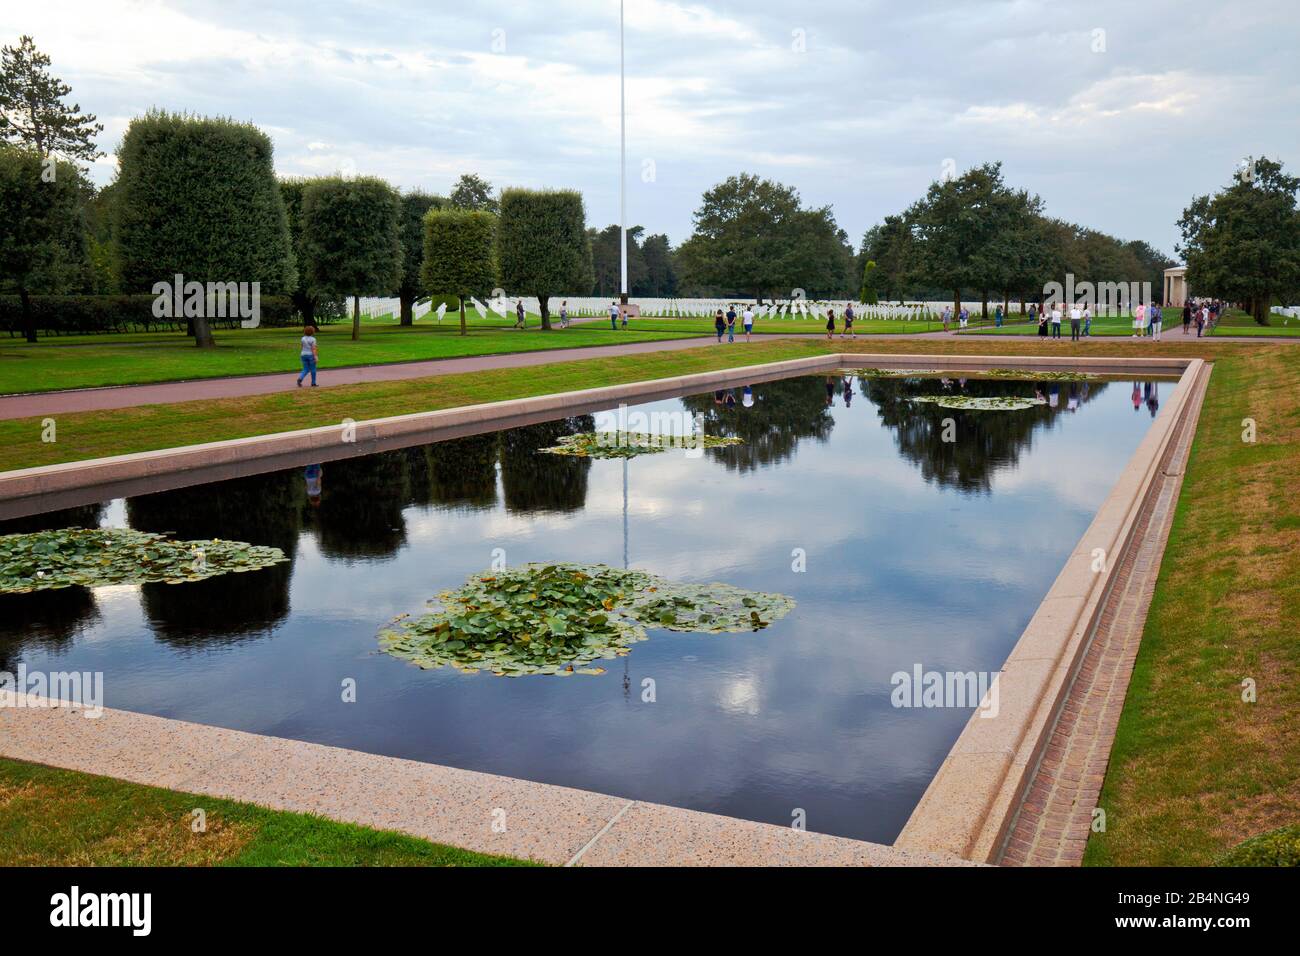 The American military cemetery Saint-Laurent on Omaha Beach in Normandy near Colleville-sur-Mer. The reflecting pond and the promenade. Stock Photo